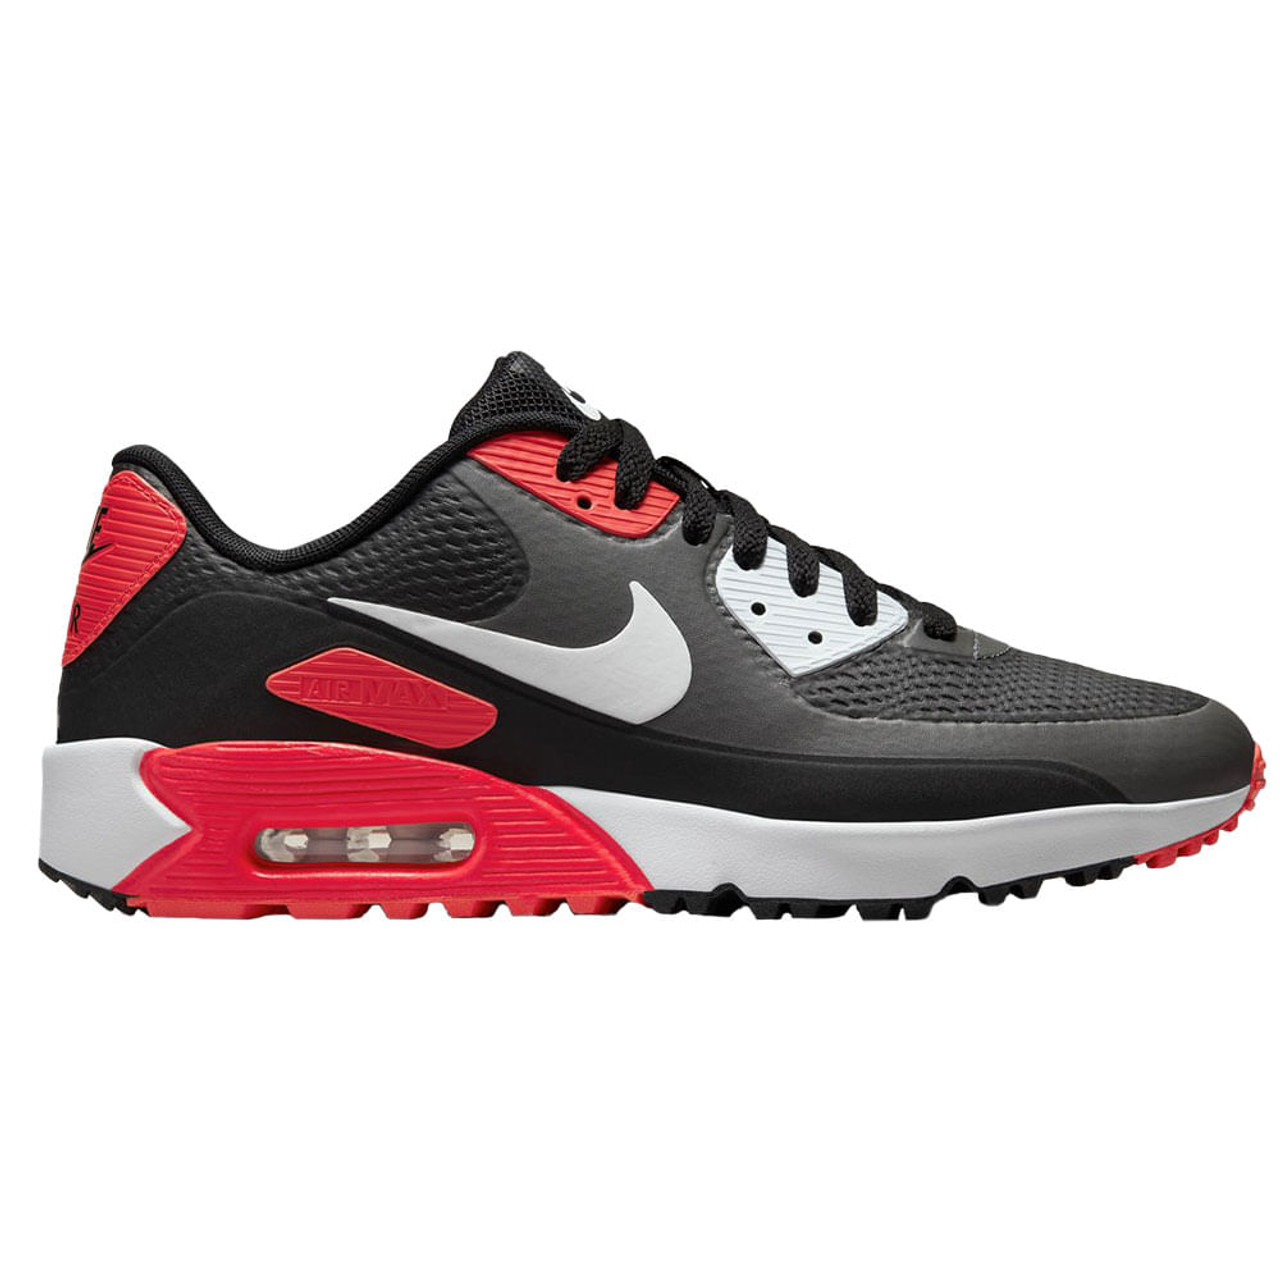 New Nike Golf Air Max 90 G Shoes Mens Size 11 Iron Grey/White/Black01207783  HB4-2-34